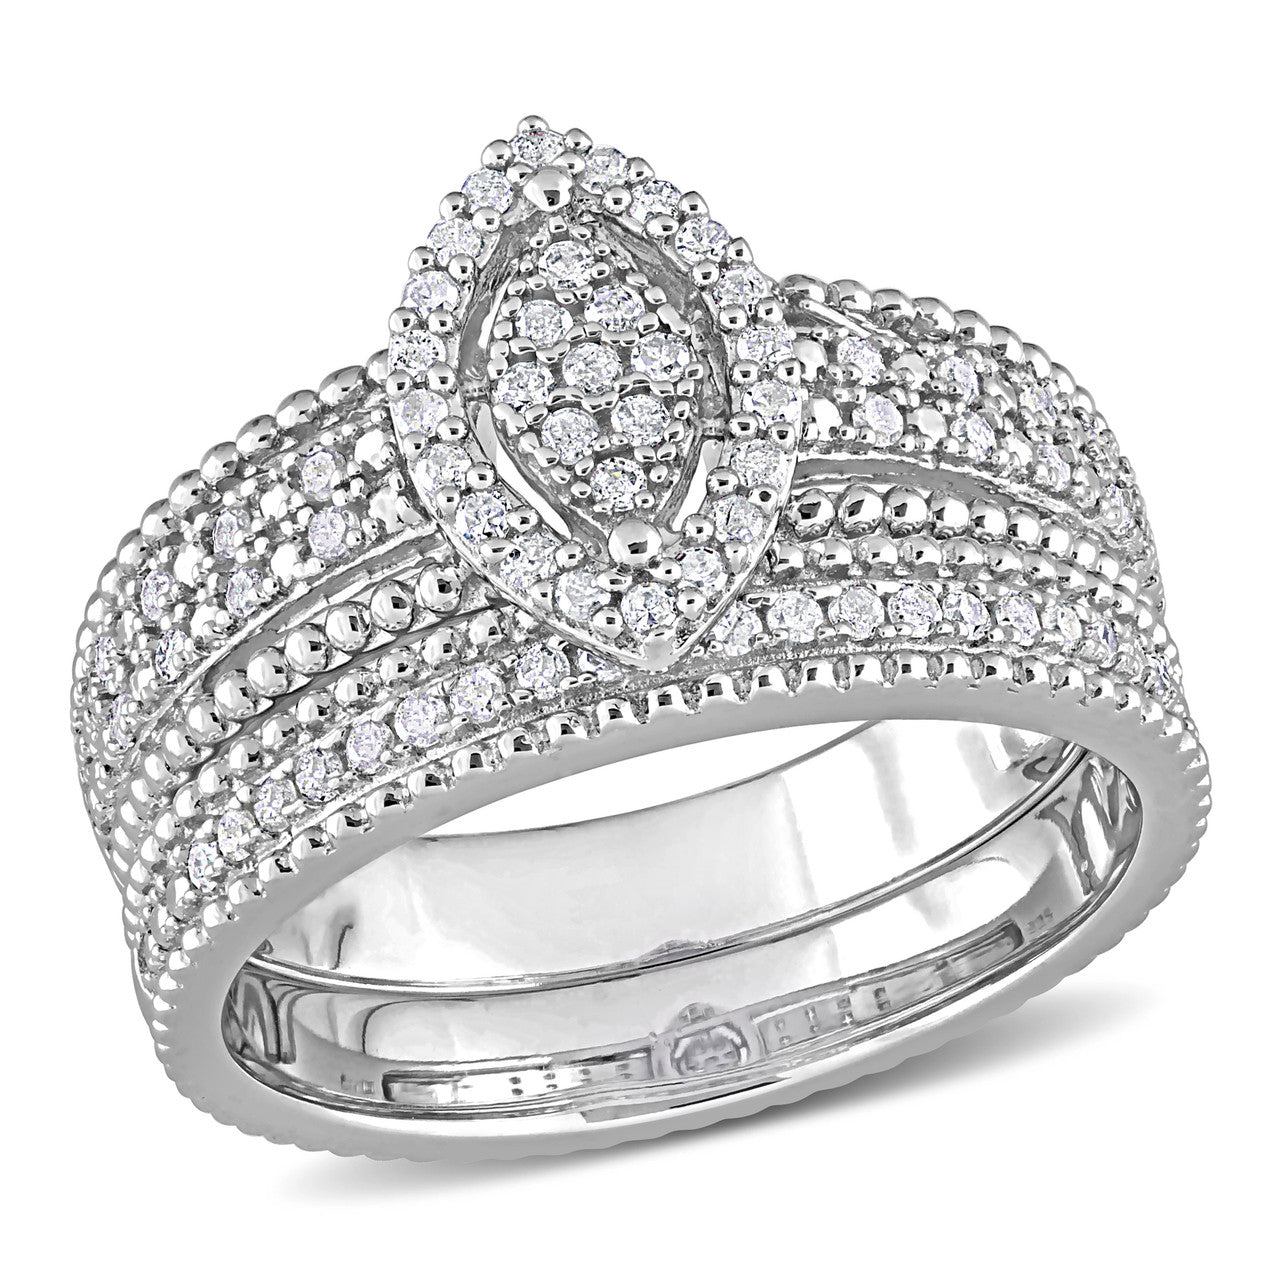 Ice Jewellery 1/3 CT Diamond Engagement Ring in Sterling Silver - 75000005732 | Ice Jewellery Australia